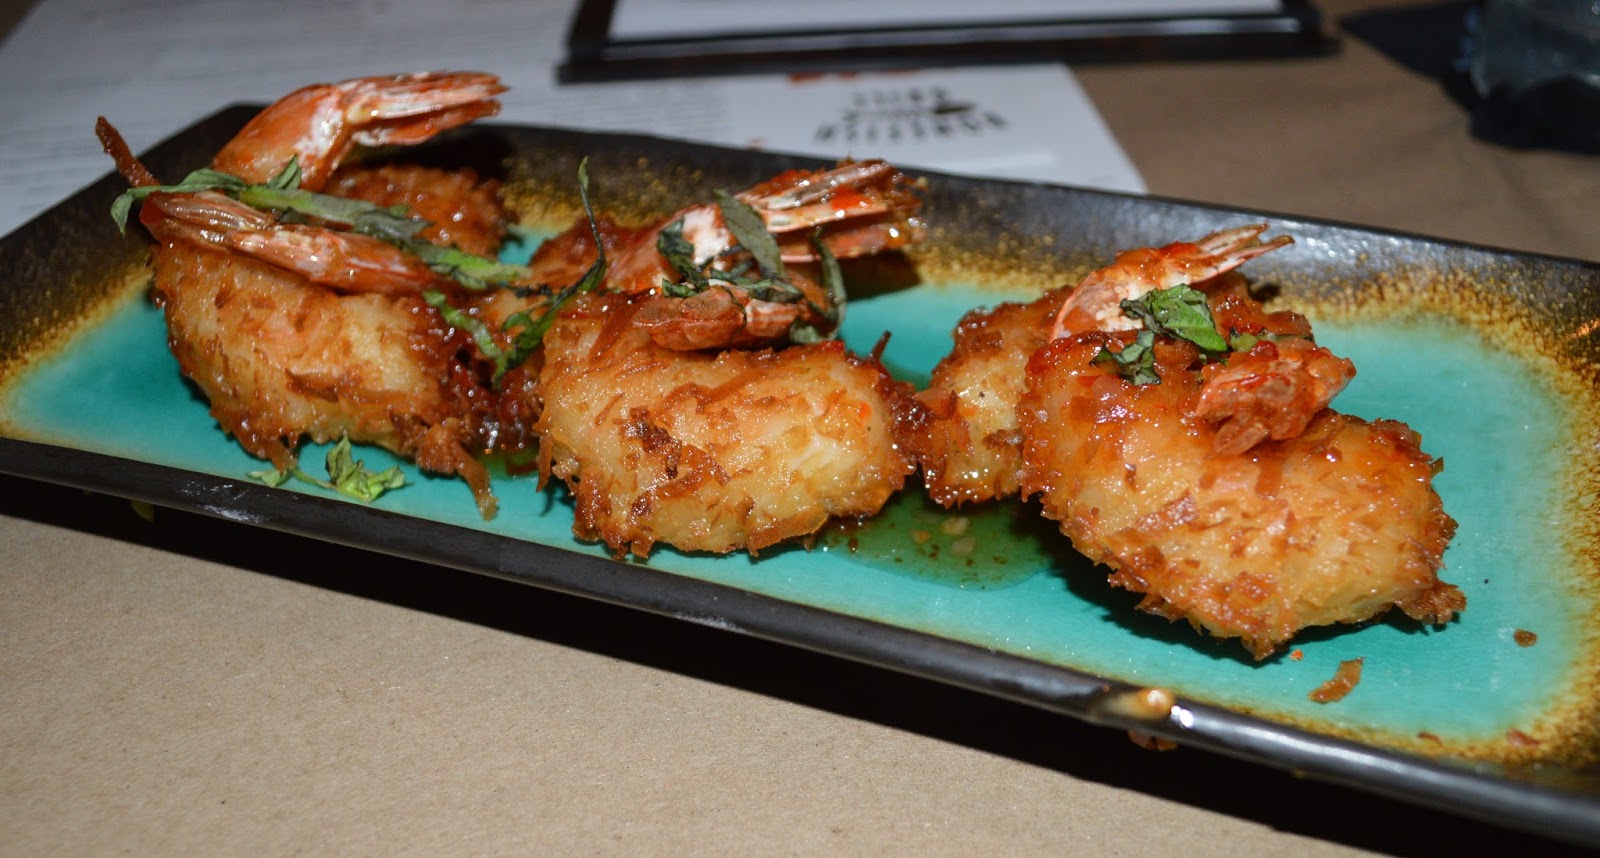 Where can you find recipes that duplicate Bonefish Grill dishes?